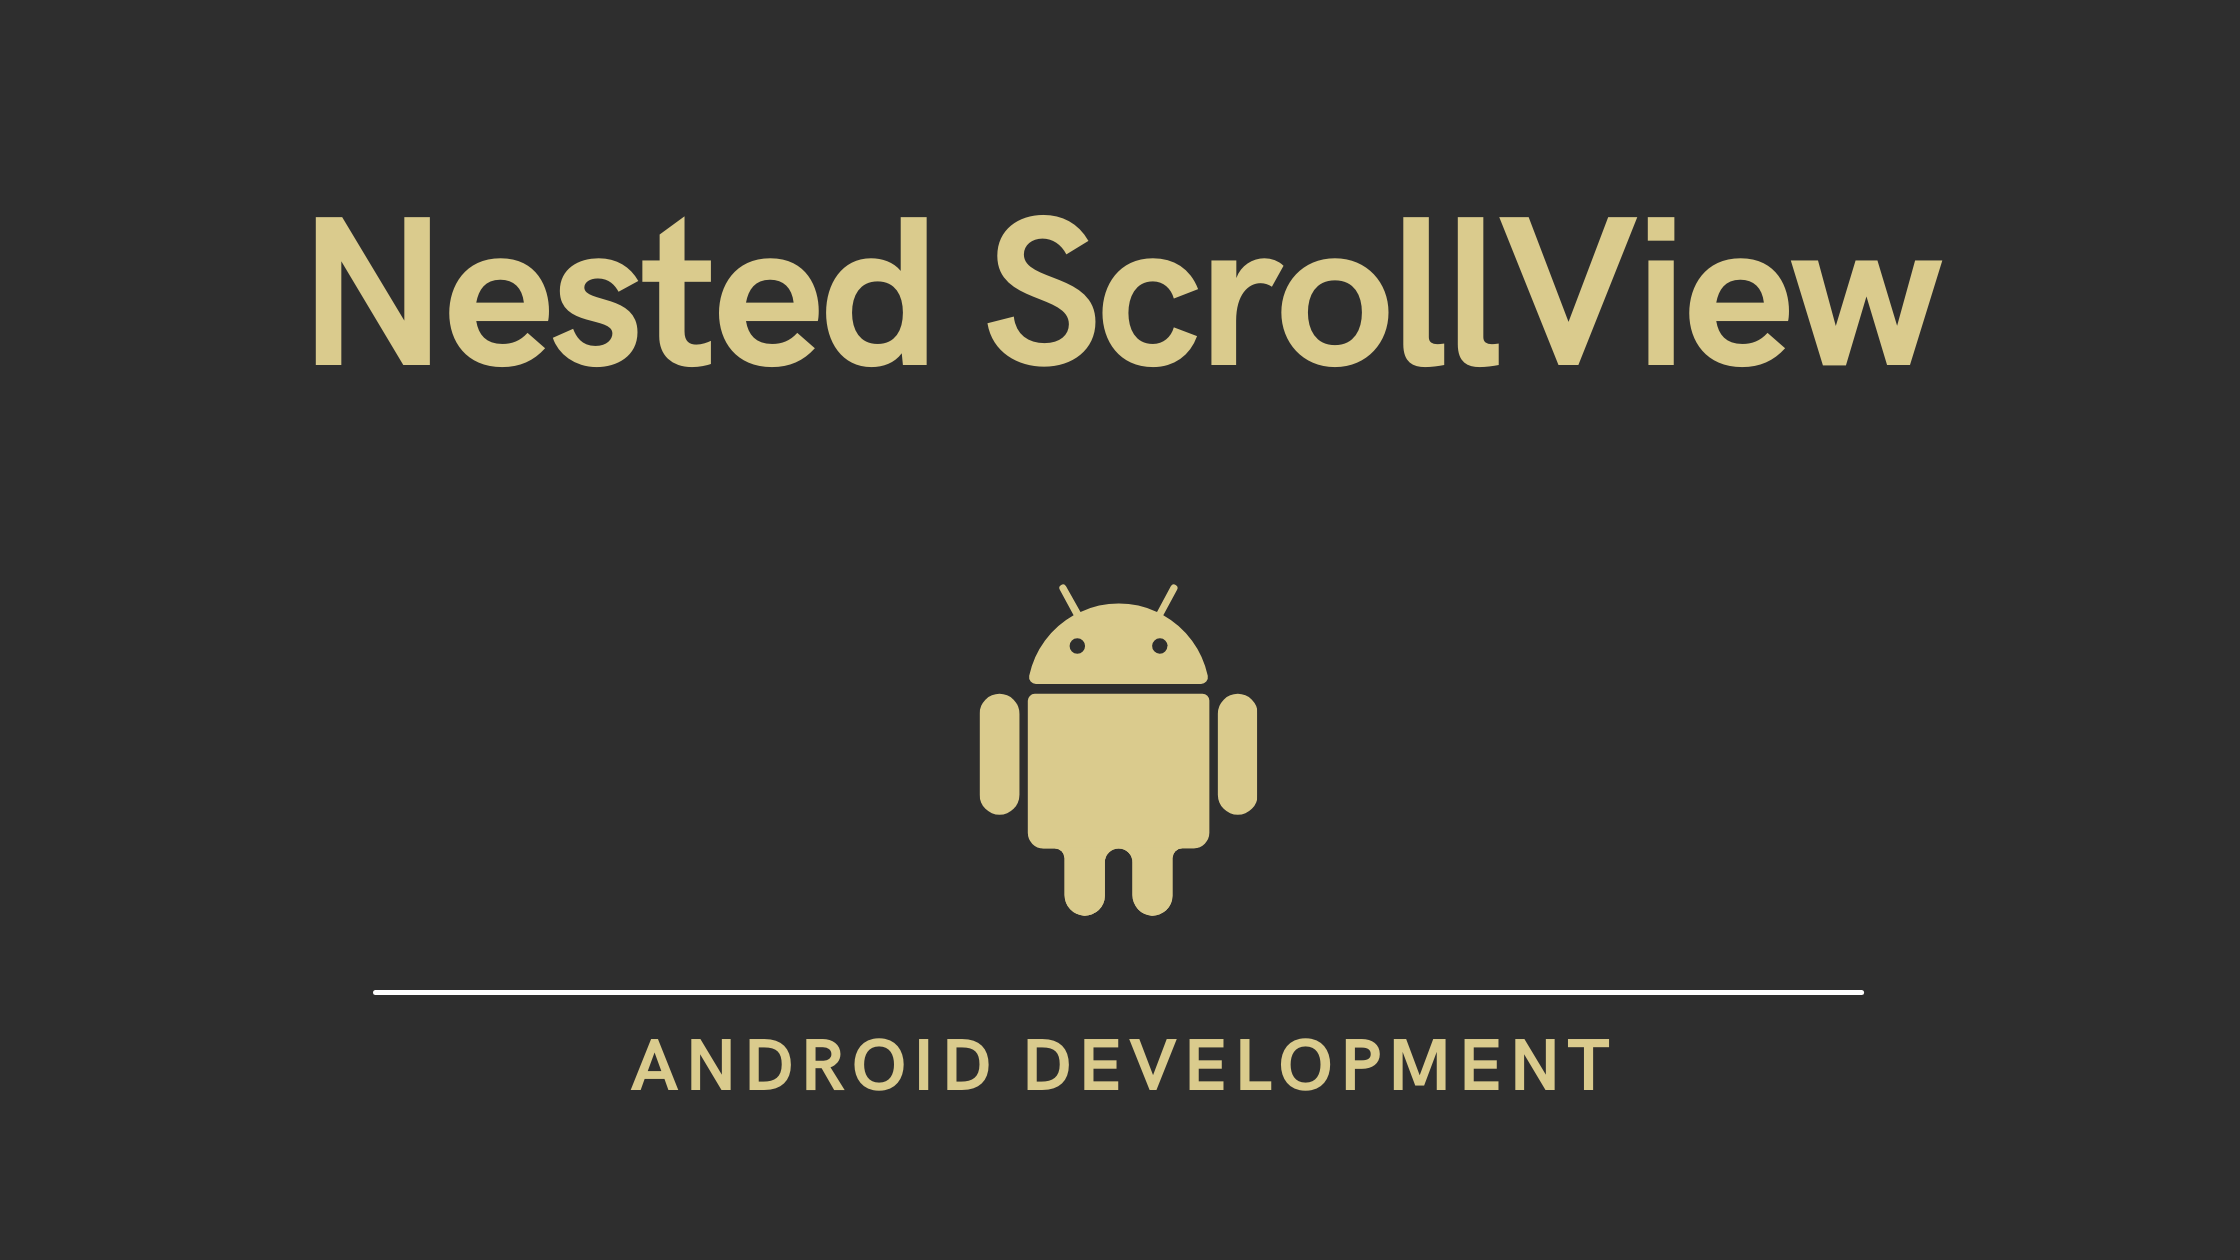 Nested scrollview